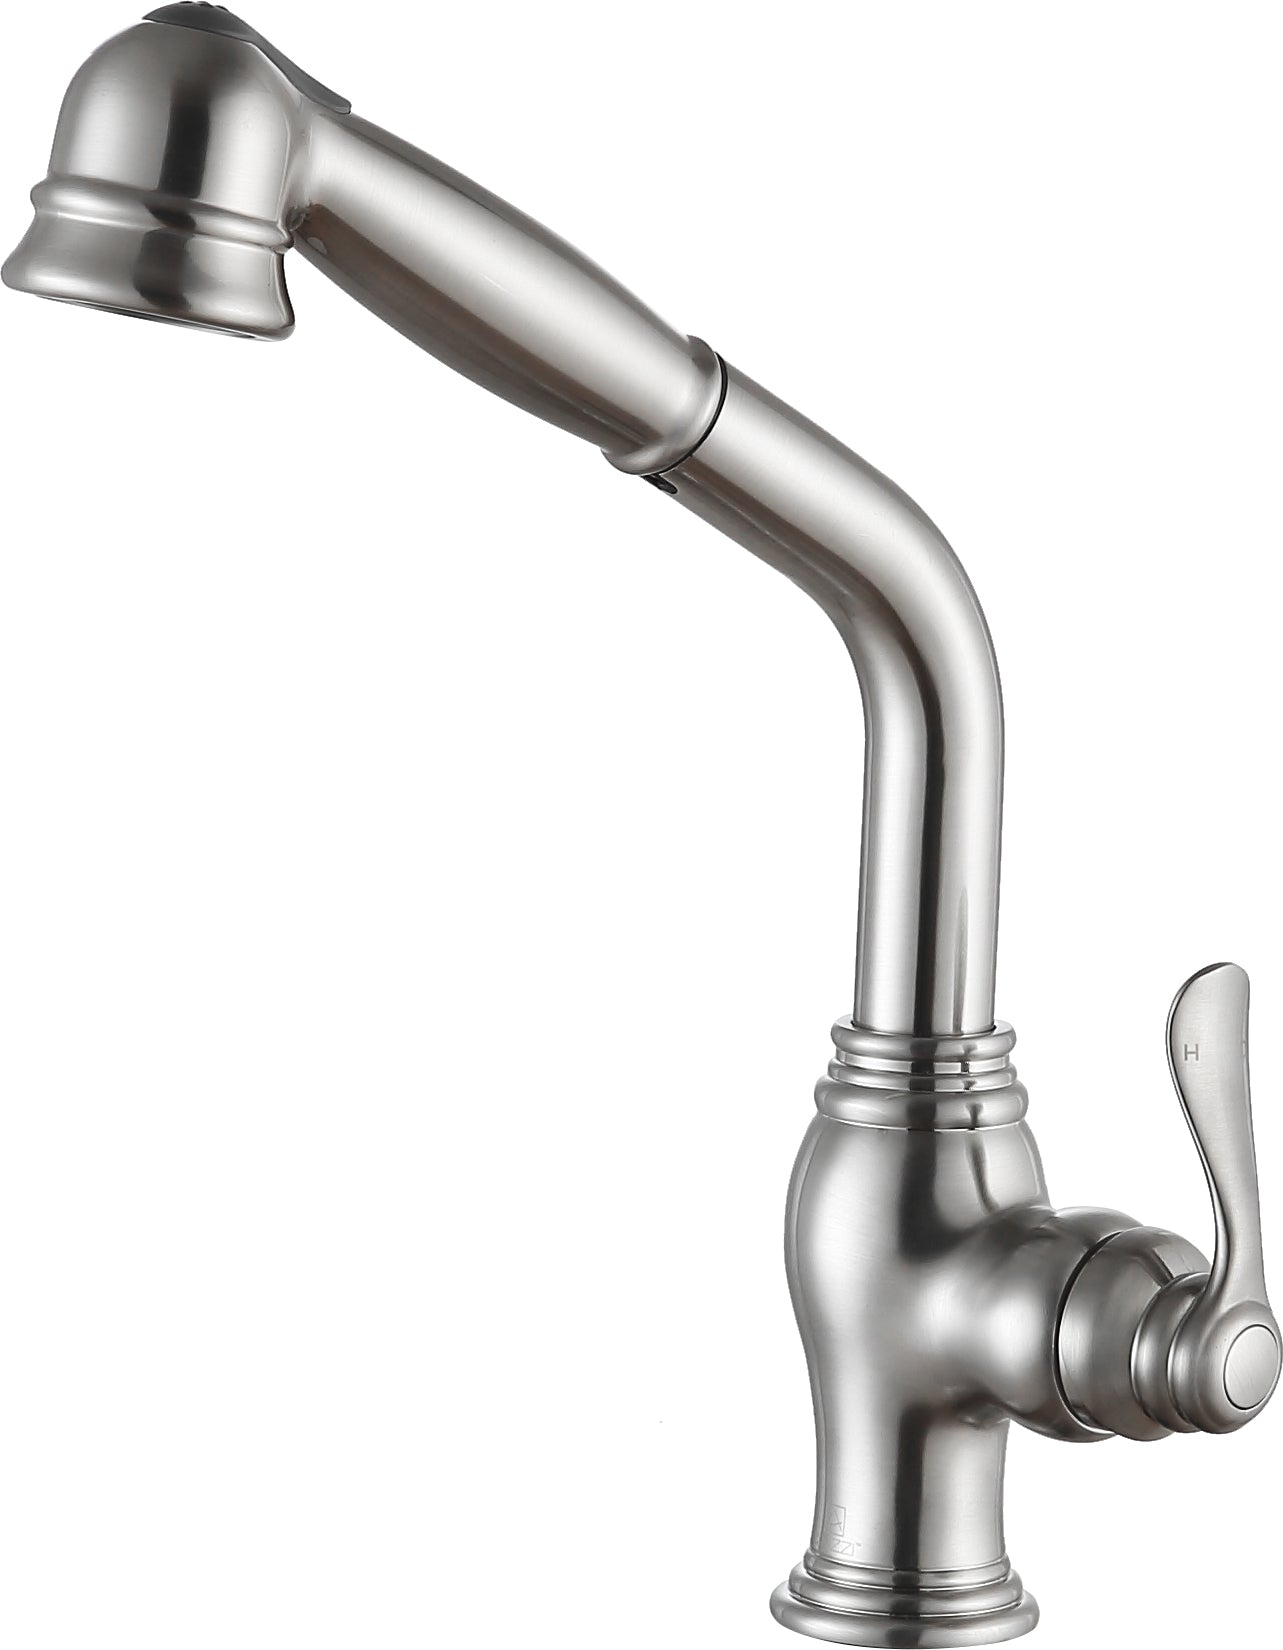 KF-AZ203BN - Del Moro Single-Handle Pull-Out Sprayer Kitchen Faucet in Brushed Nickel